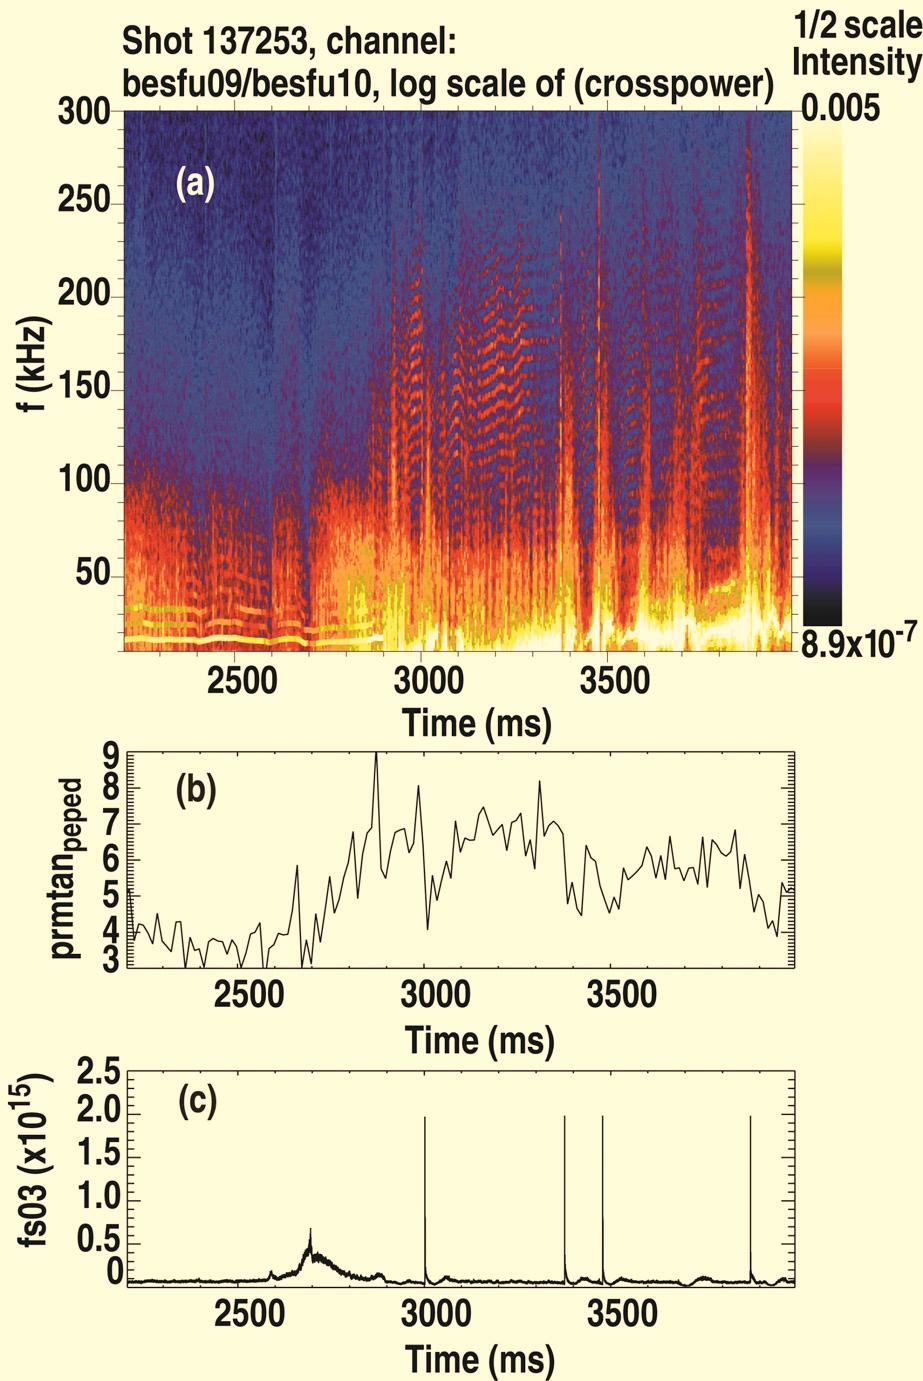 4 FIG. 3. (a) Cross spectrum between two poloidally separated BES channels showing HFC from ~100 250 khz starting from time ~2900 ms to 4000 ms; (b) electron pedestal pressure; (c) edge D light.